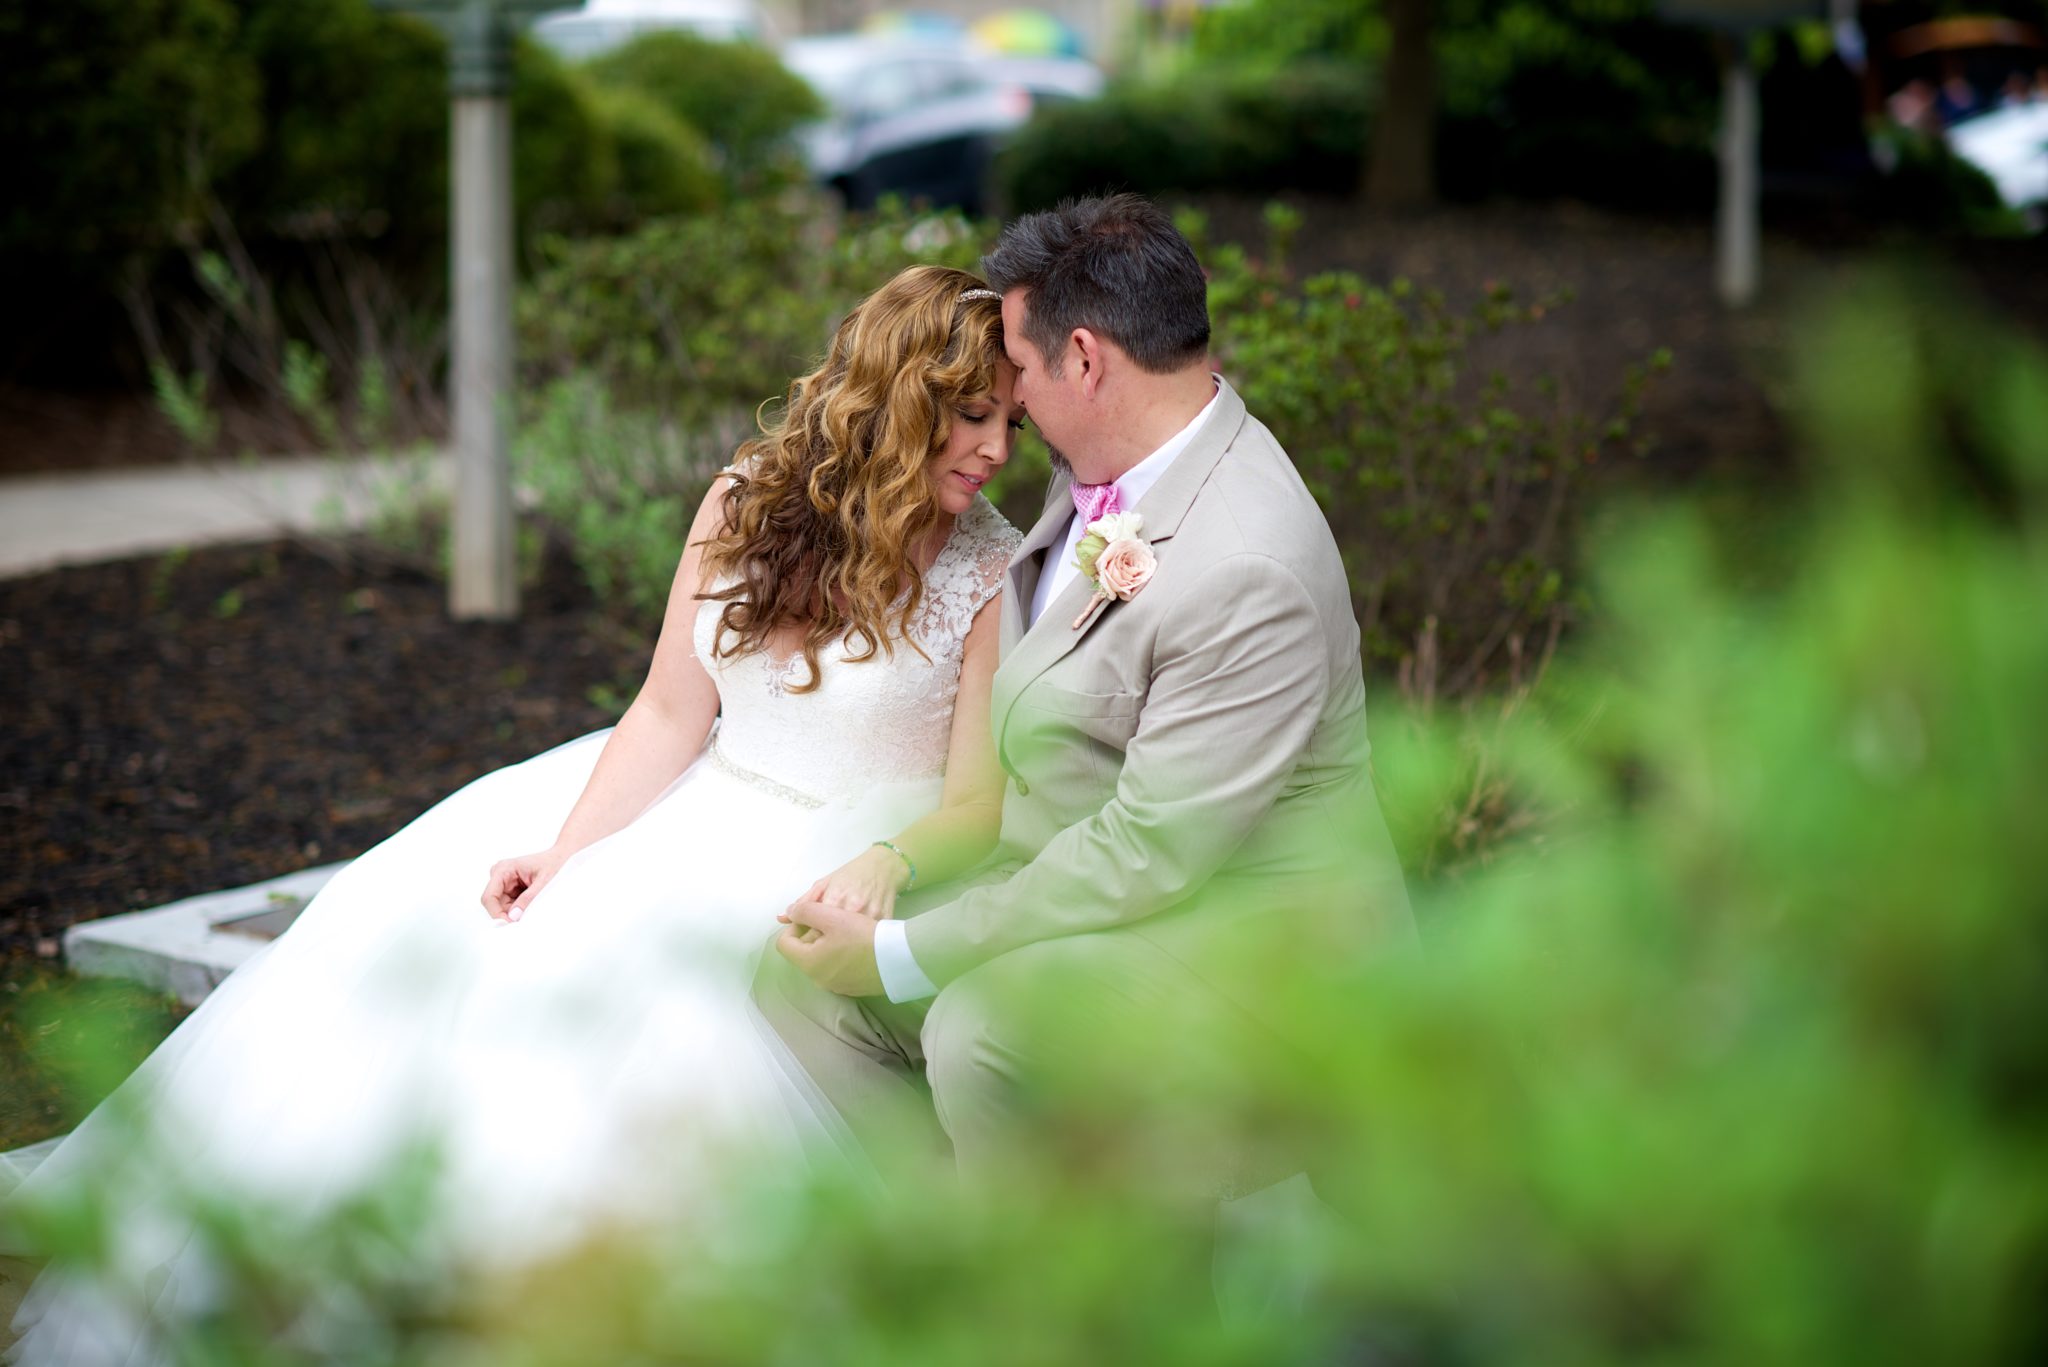 Mandi Mitchell Photography, Old Decatur Courthouse, Wedding Couple